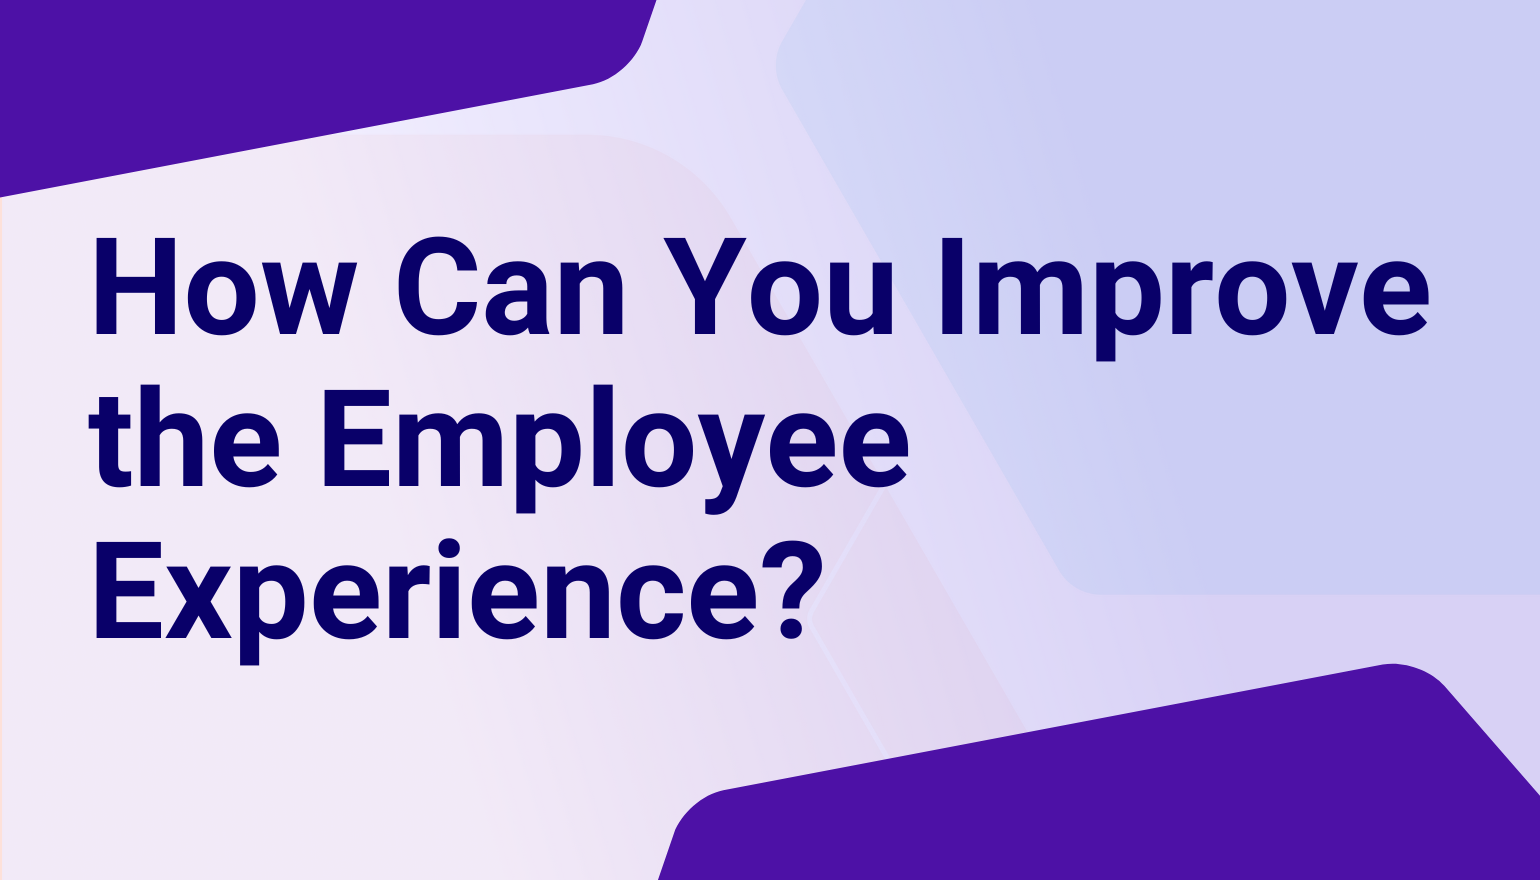 How Can You Improve the Employee Experience?